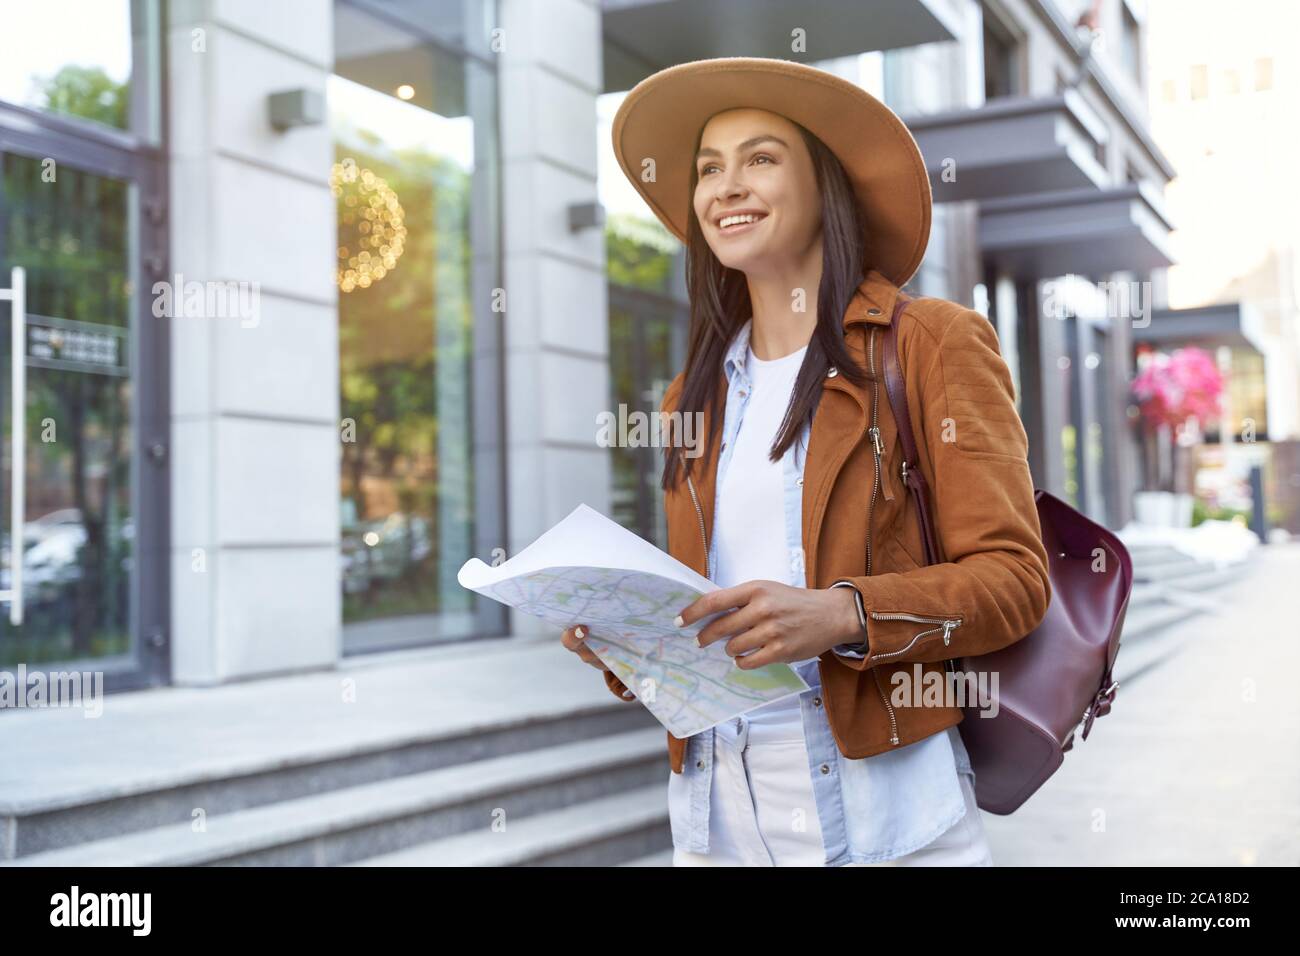 Traveling abroad. Young happy female traveler or tourist wearing hat and backpack holding map and smiling while walking on city street. Travel, tourism, vacation Stock Photo